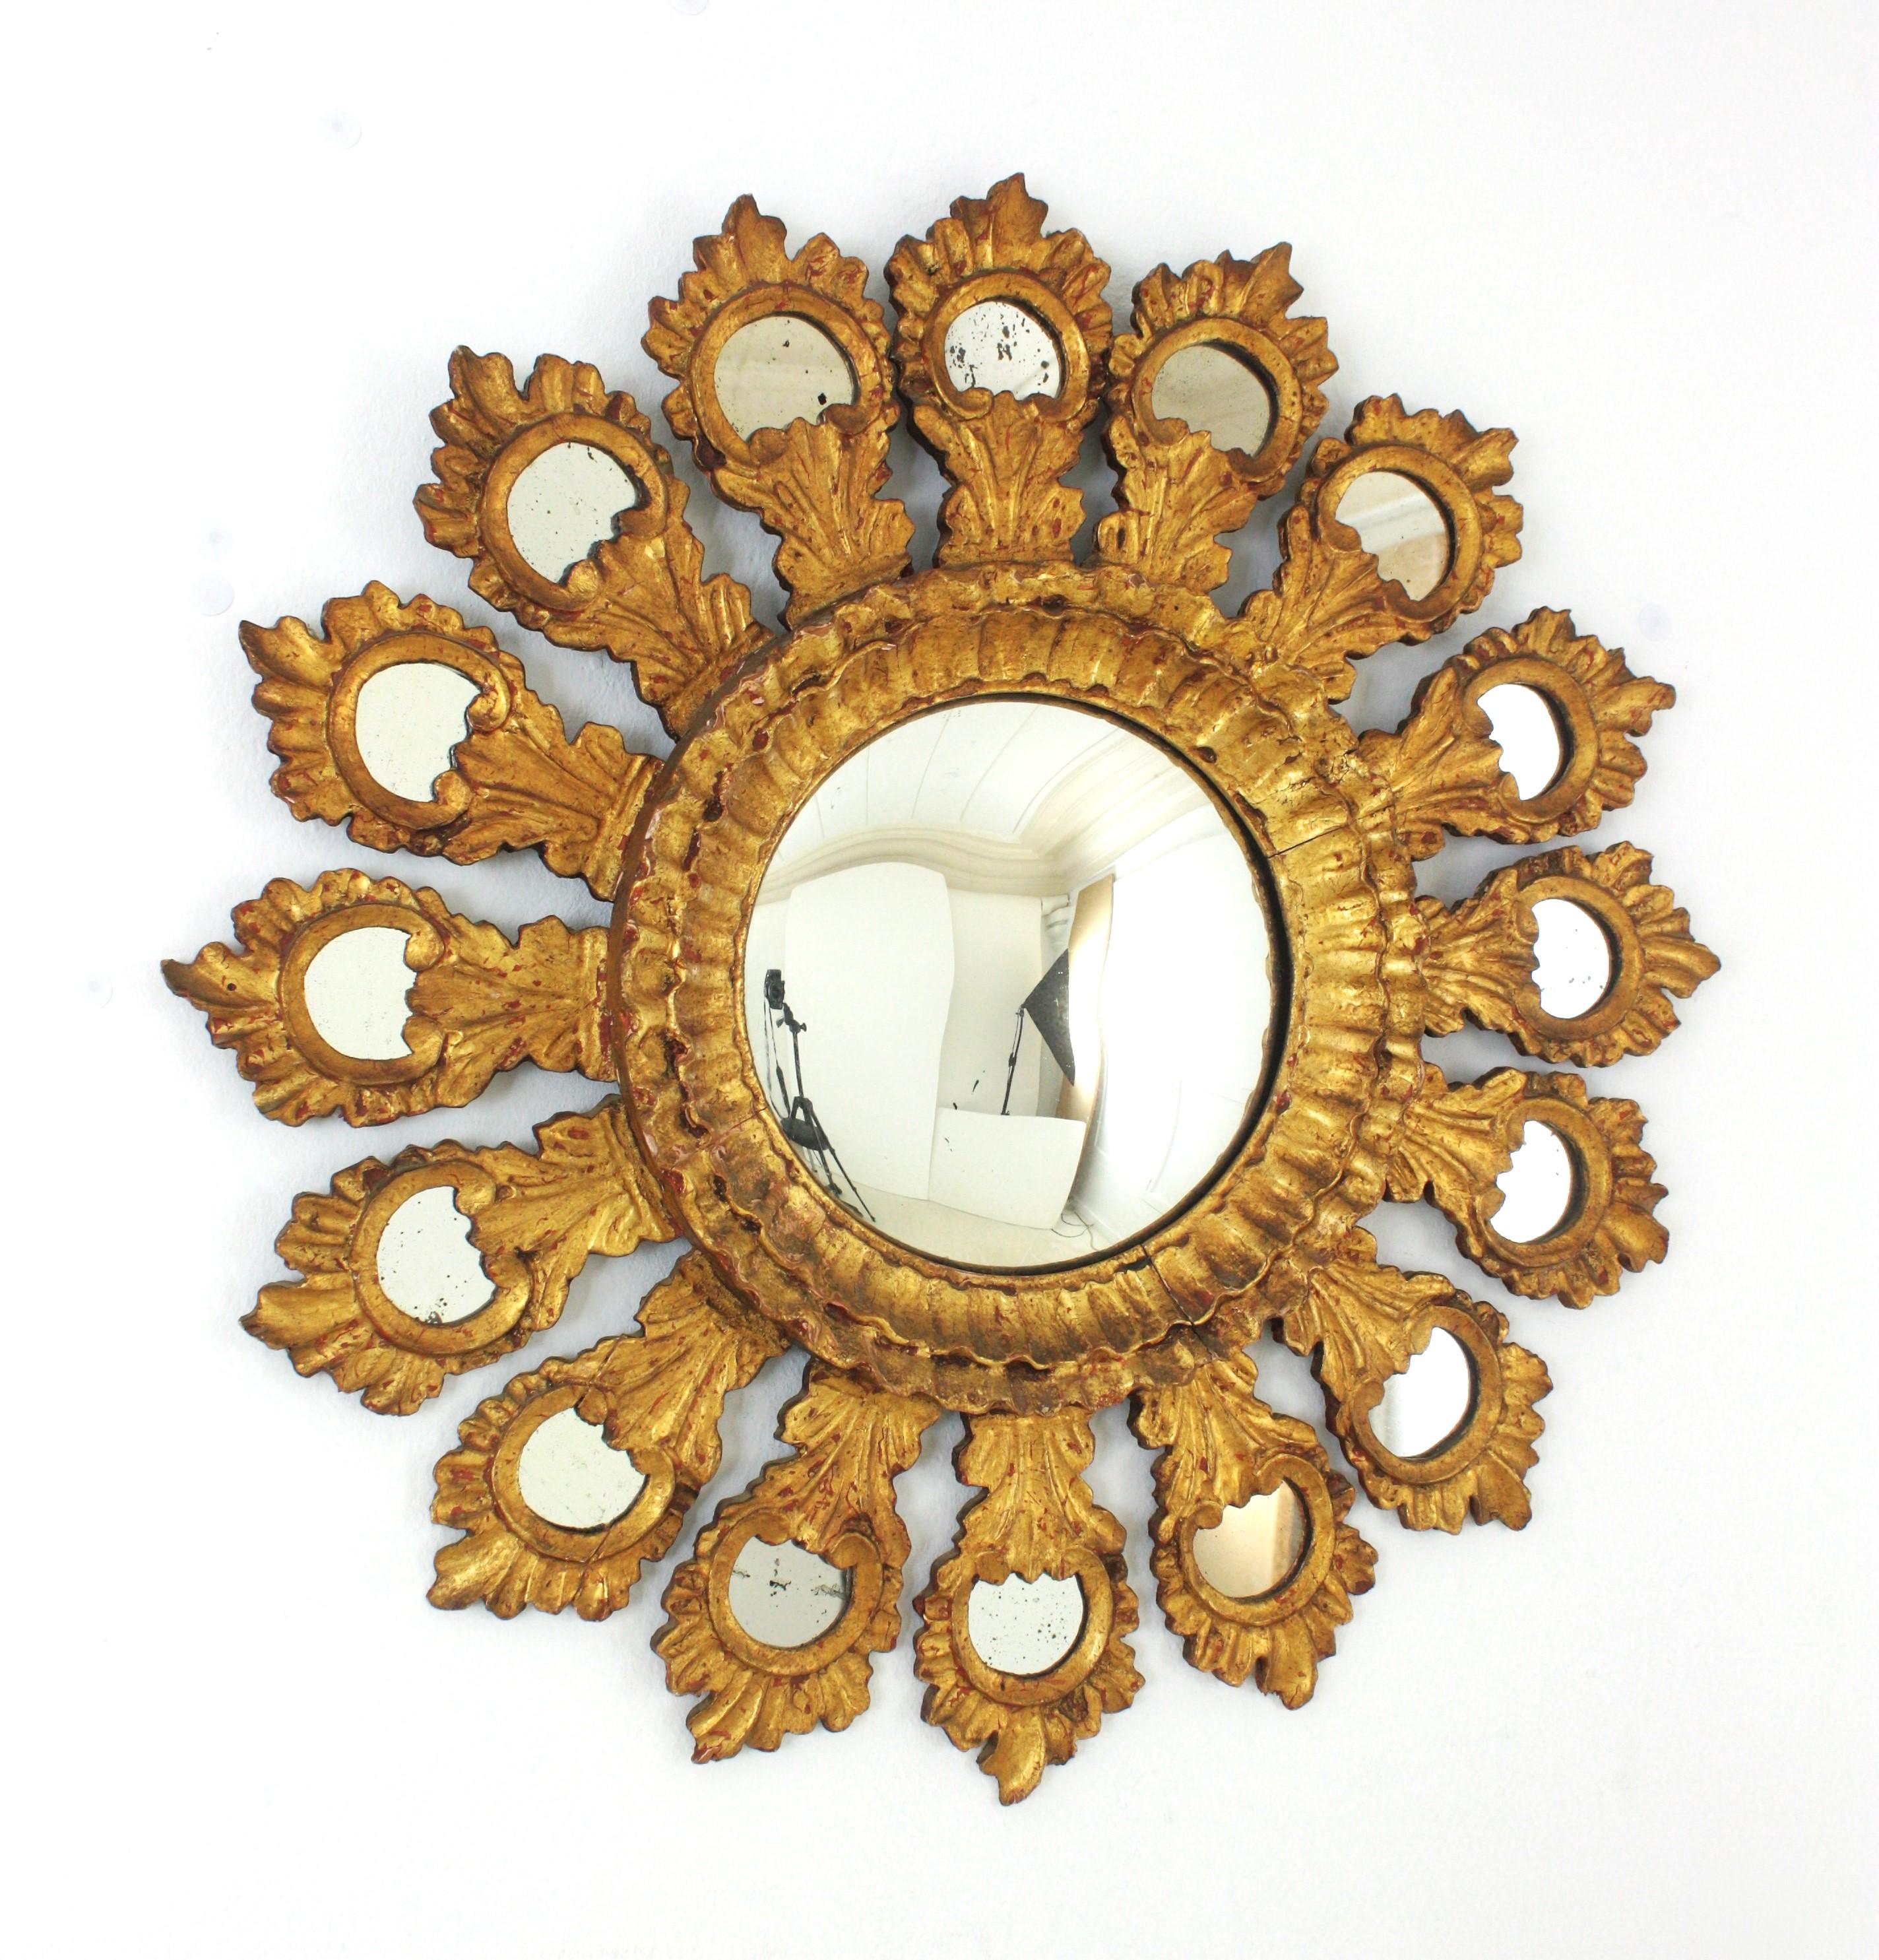 Spanish Baroque Sunburst Gilt Carved Wood Bullseye Mirror with Mirror Insets For Sale 7